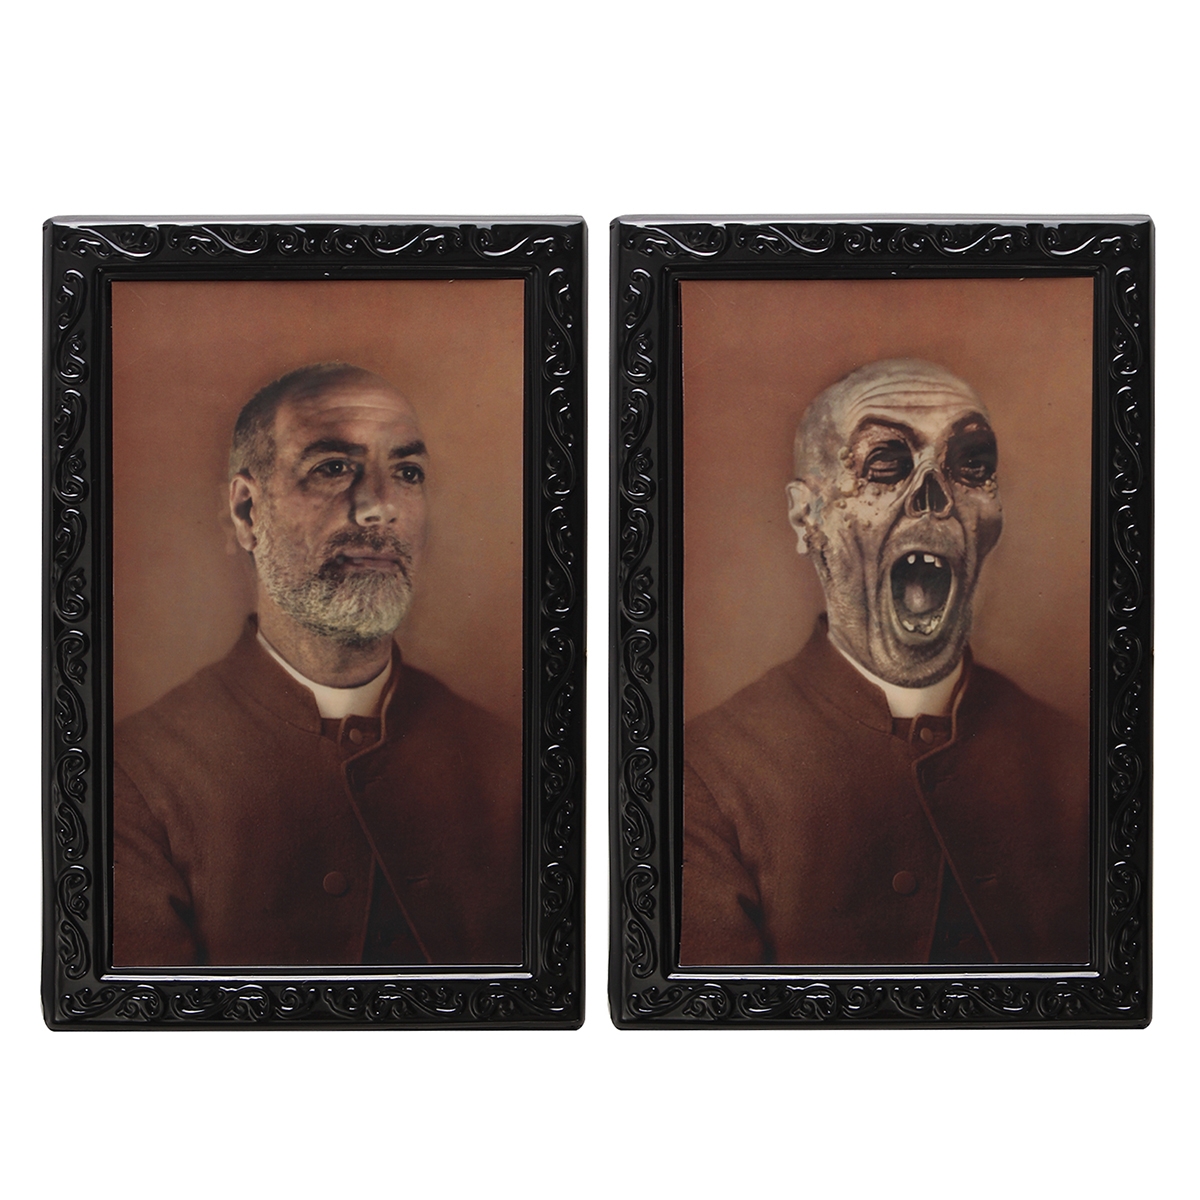 Halloween Lenticular 3D Changing Face Horror Portrait Haunted Spooky Decorations Ornaments